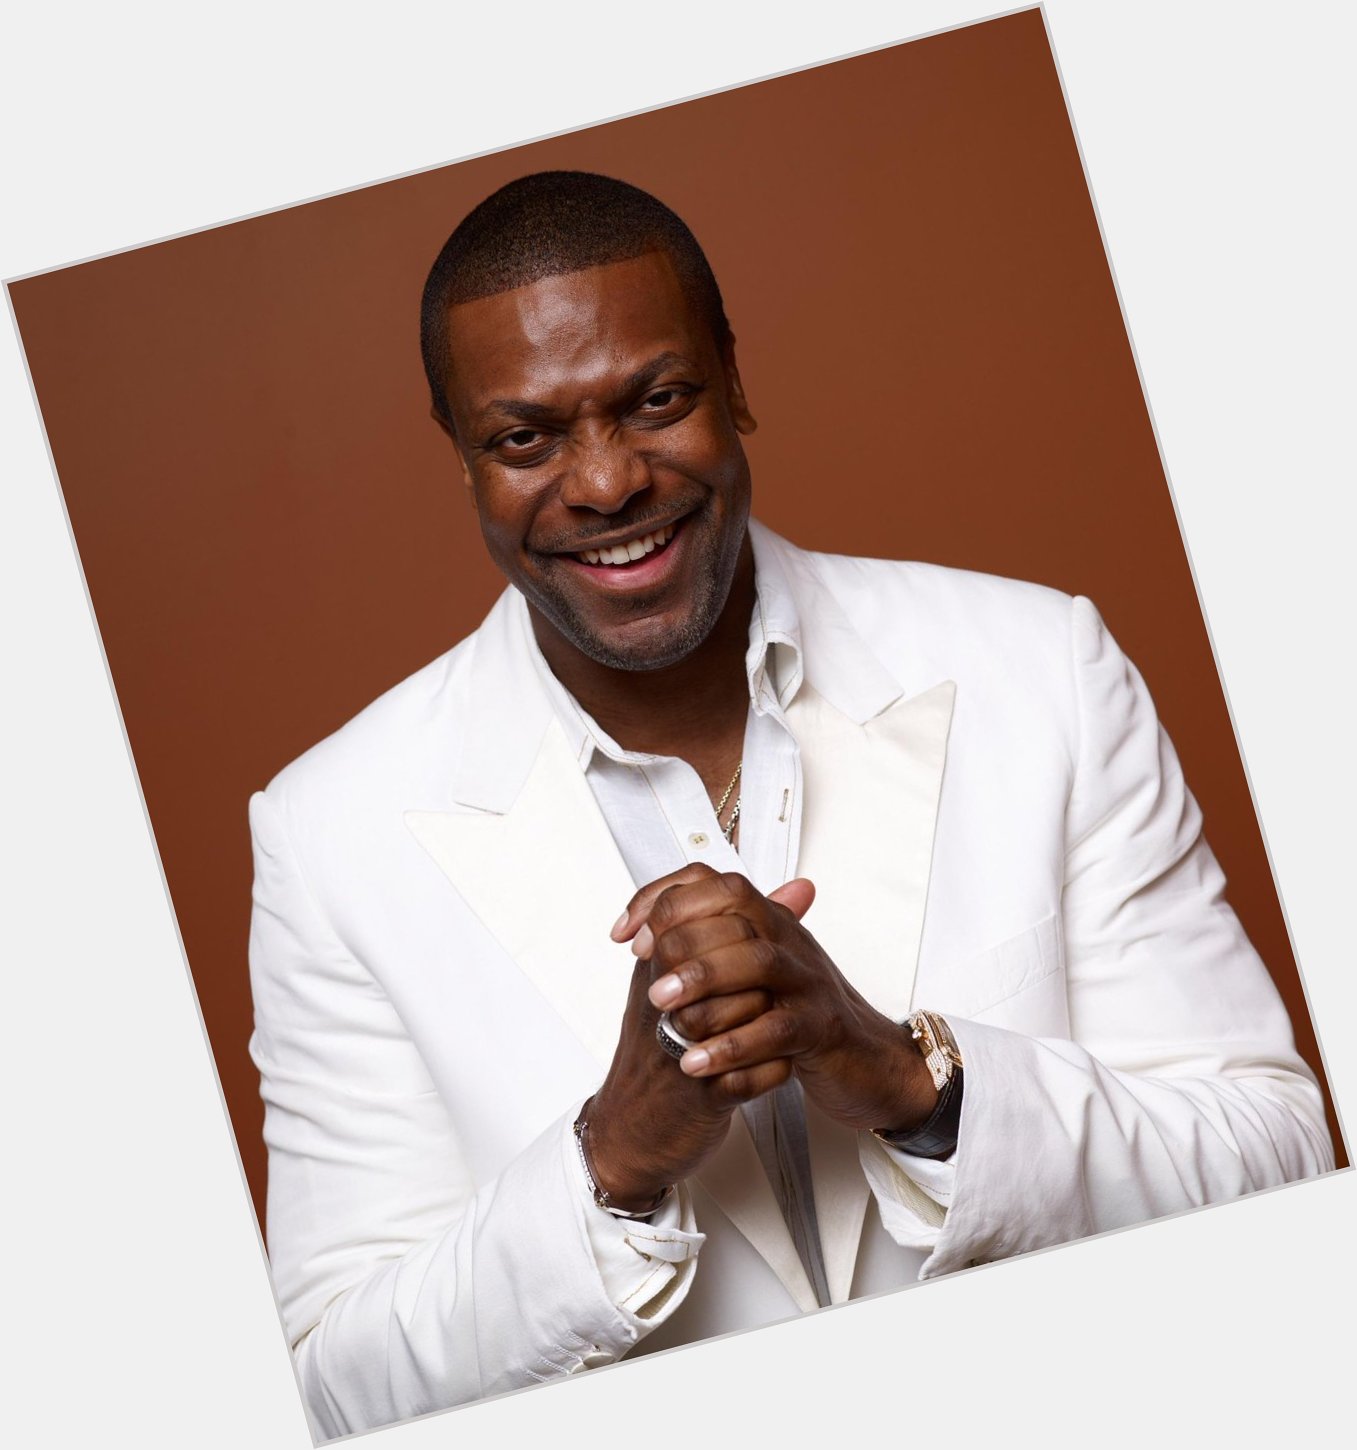 Here is wishing Chris Tucker , the funny man with amazing Kung Fu skills a very Happy Birthday! 